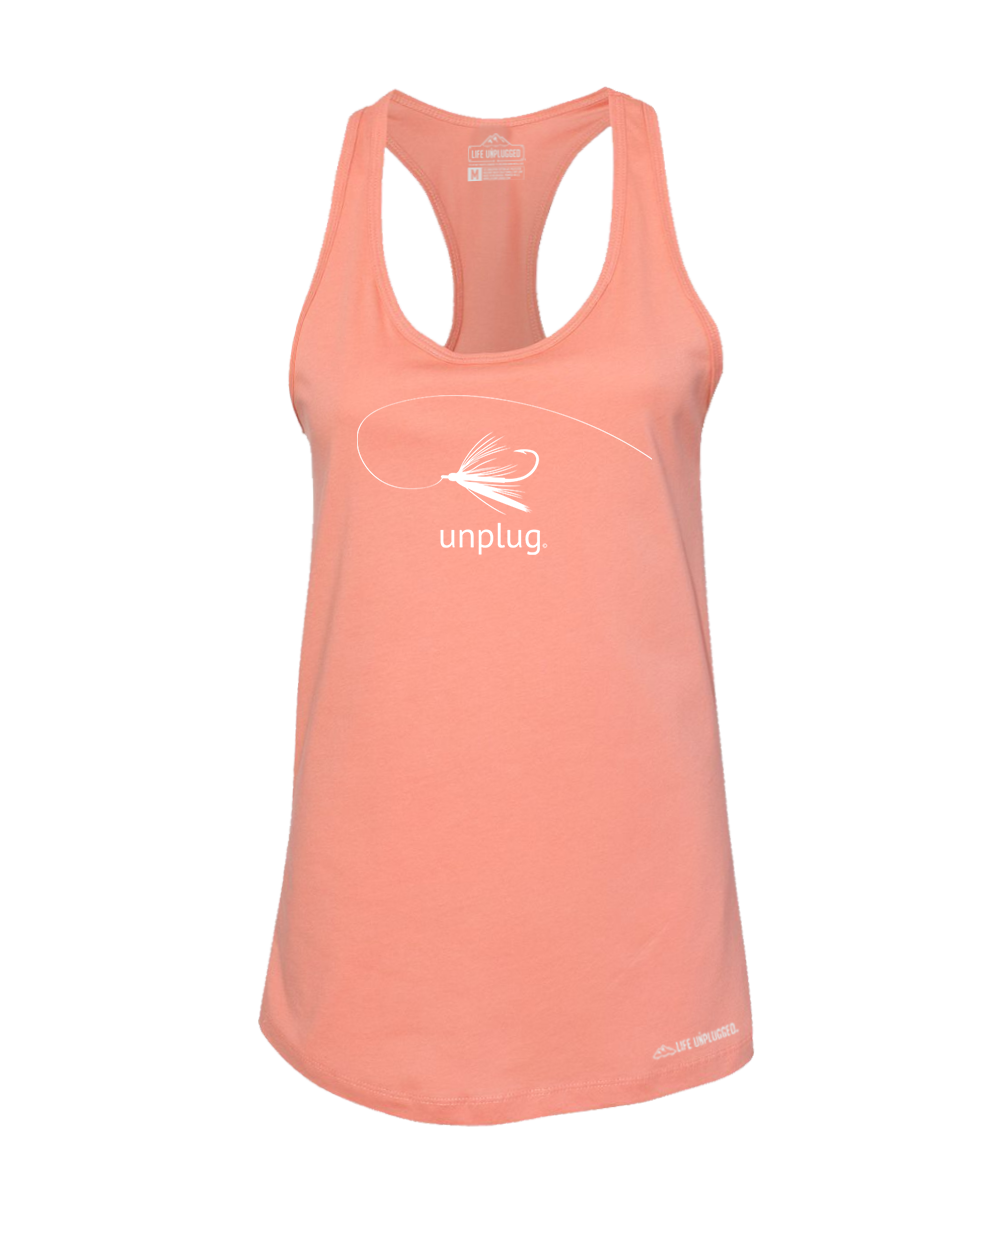 Fly Fishing Premium Women's Relaxed Fit Racerback Tank Top - Life Unplugged